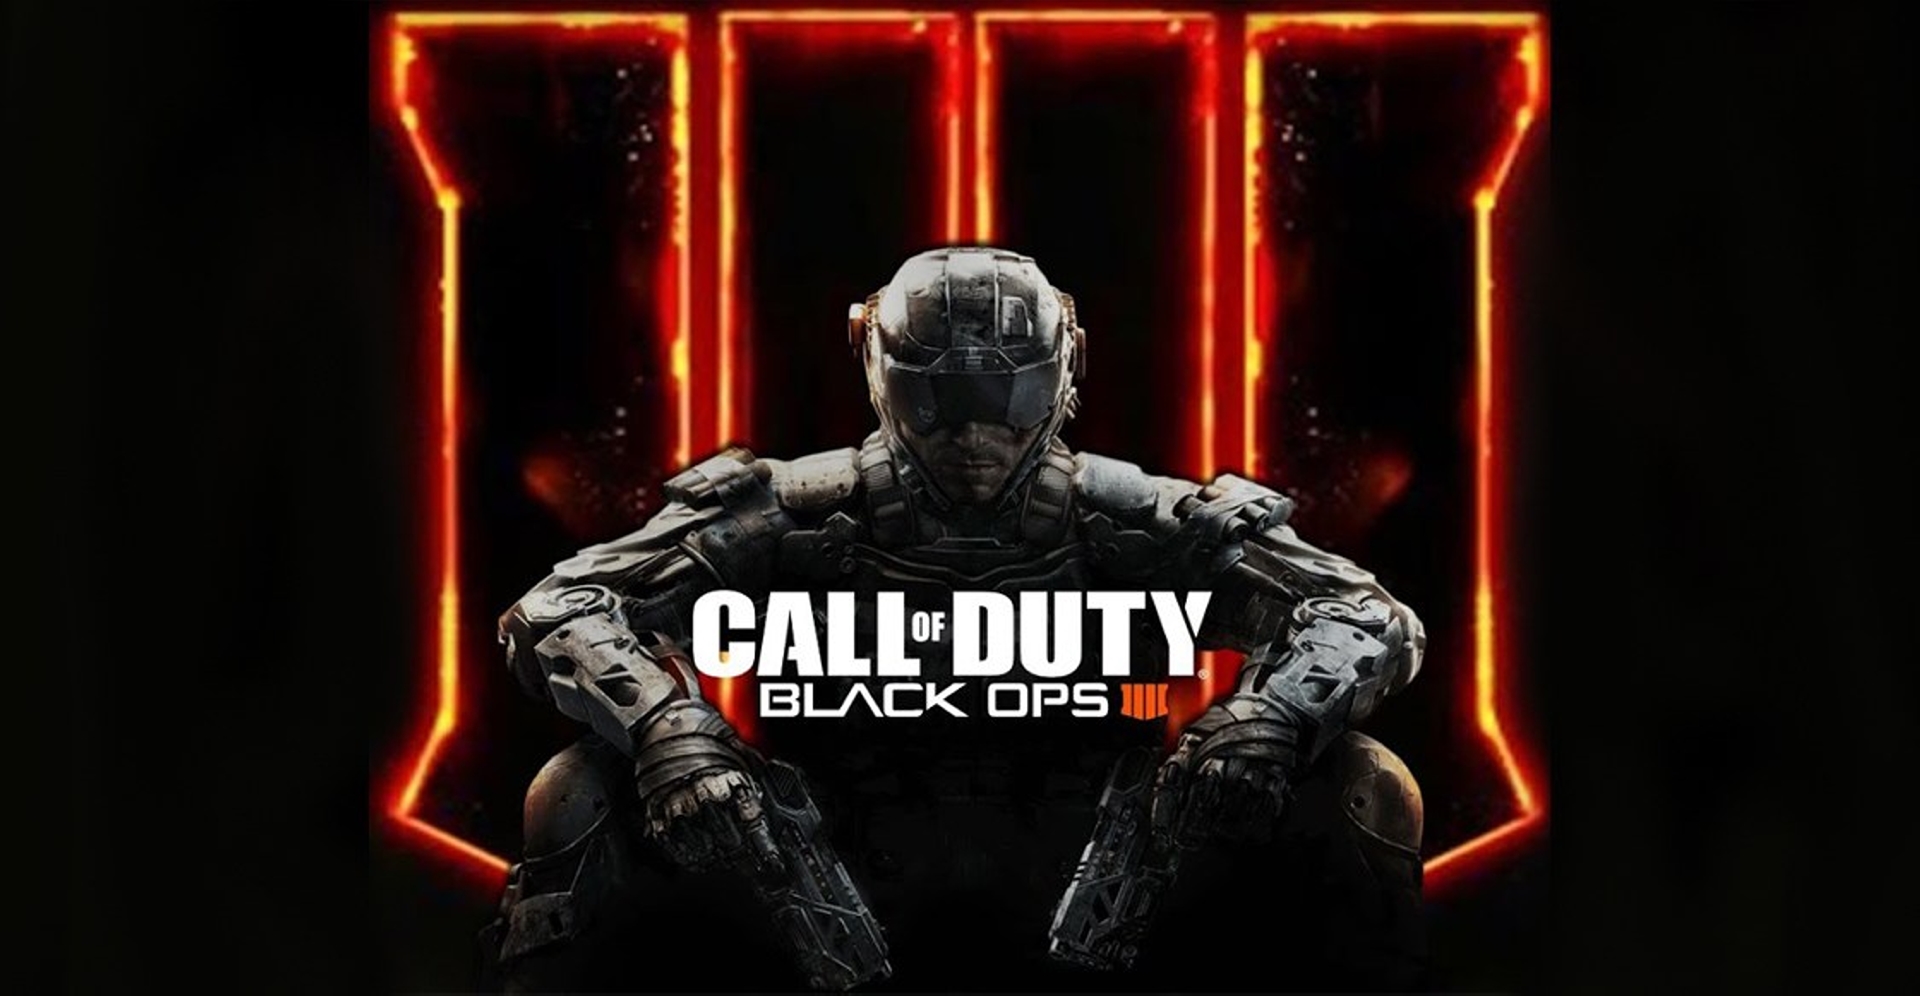 5120x1440p 329 call of duty black ops 4 background